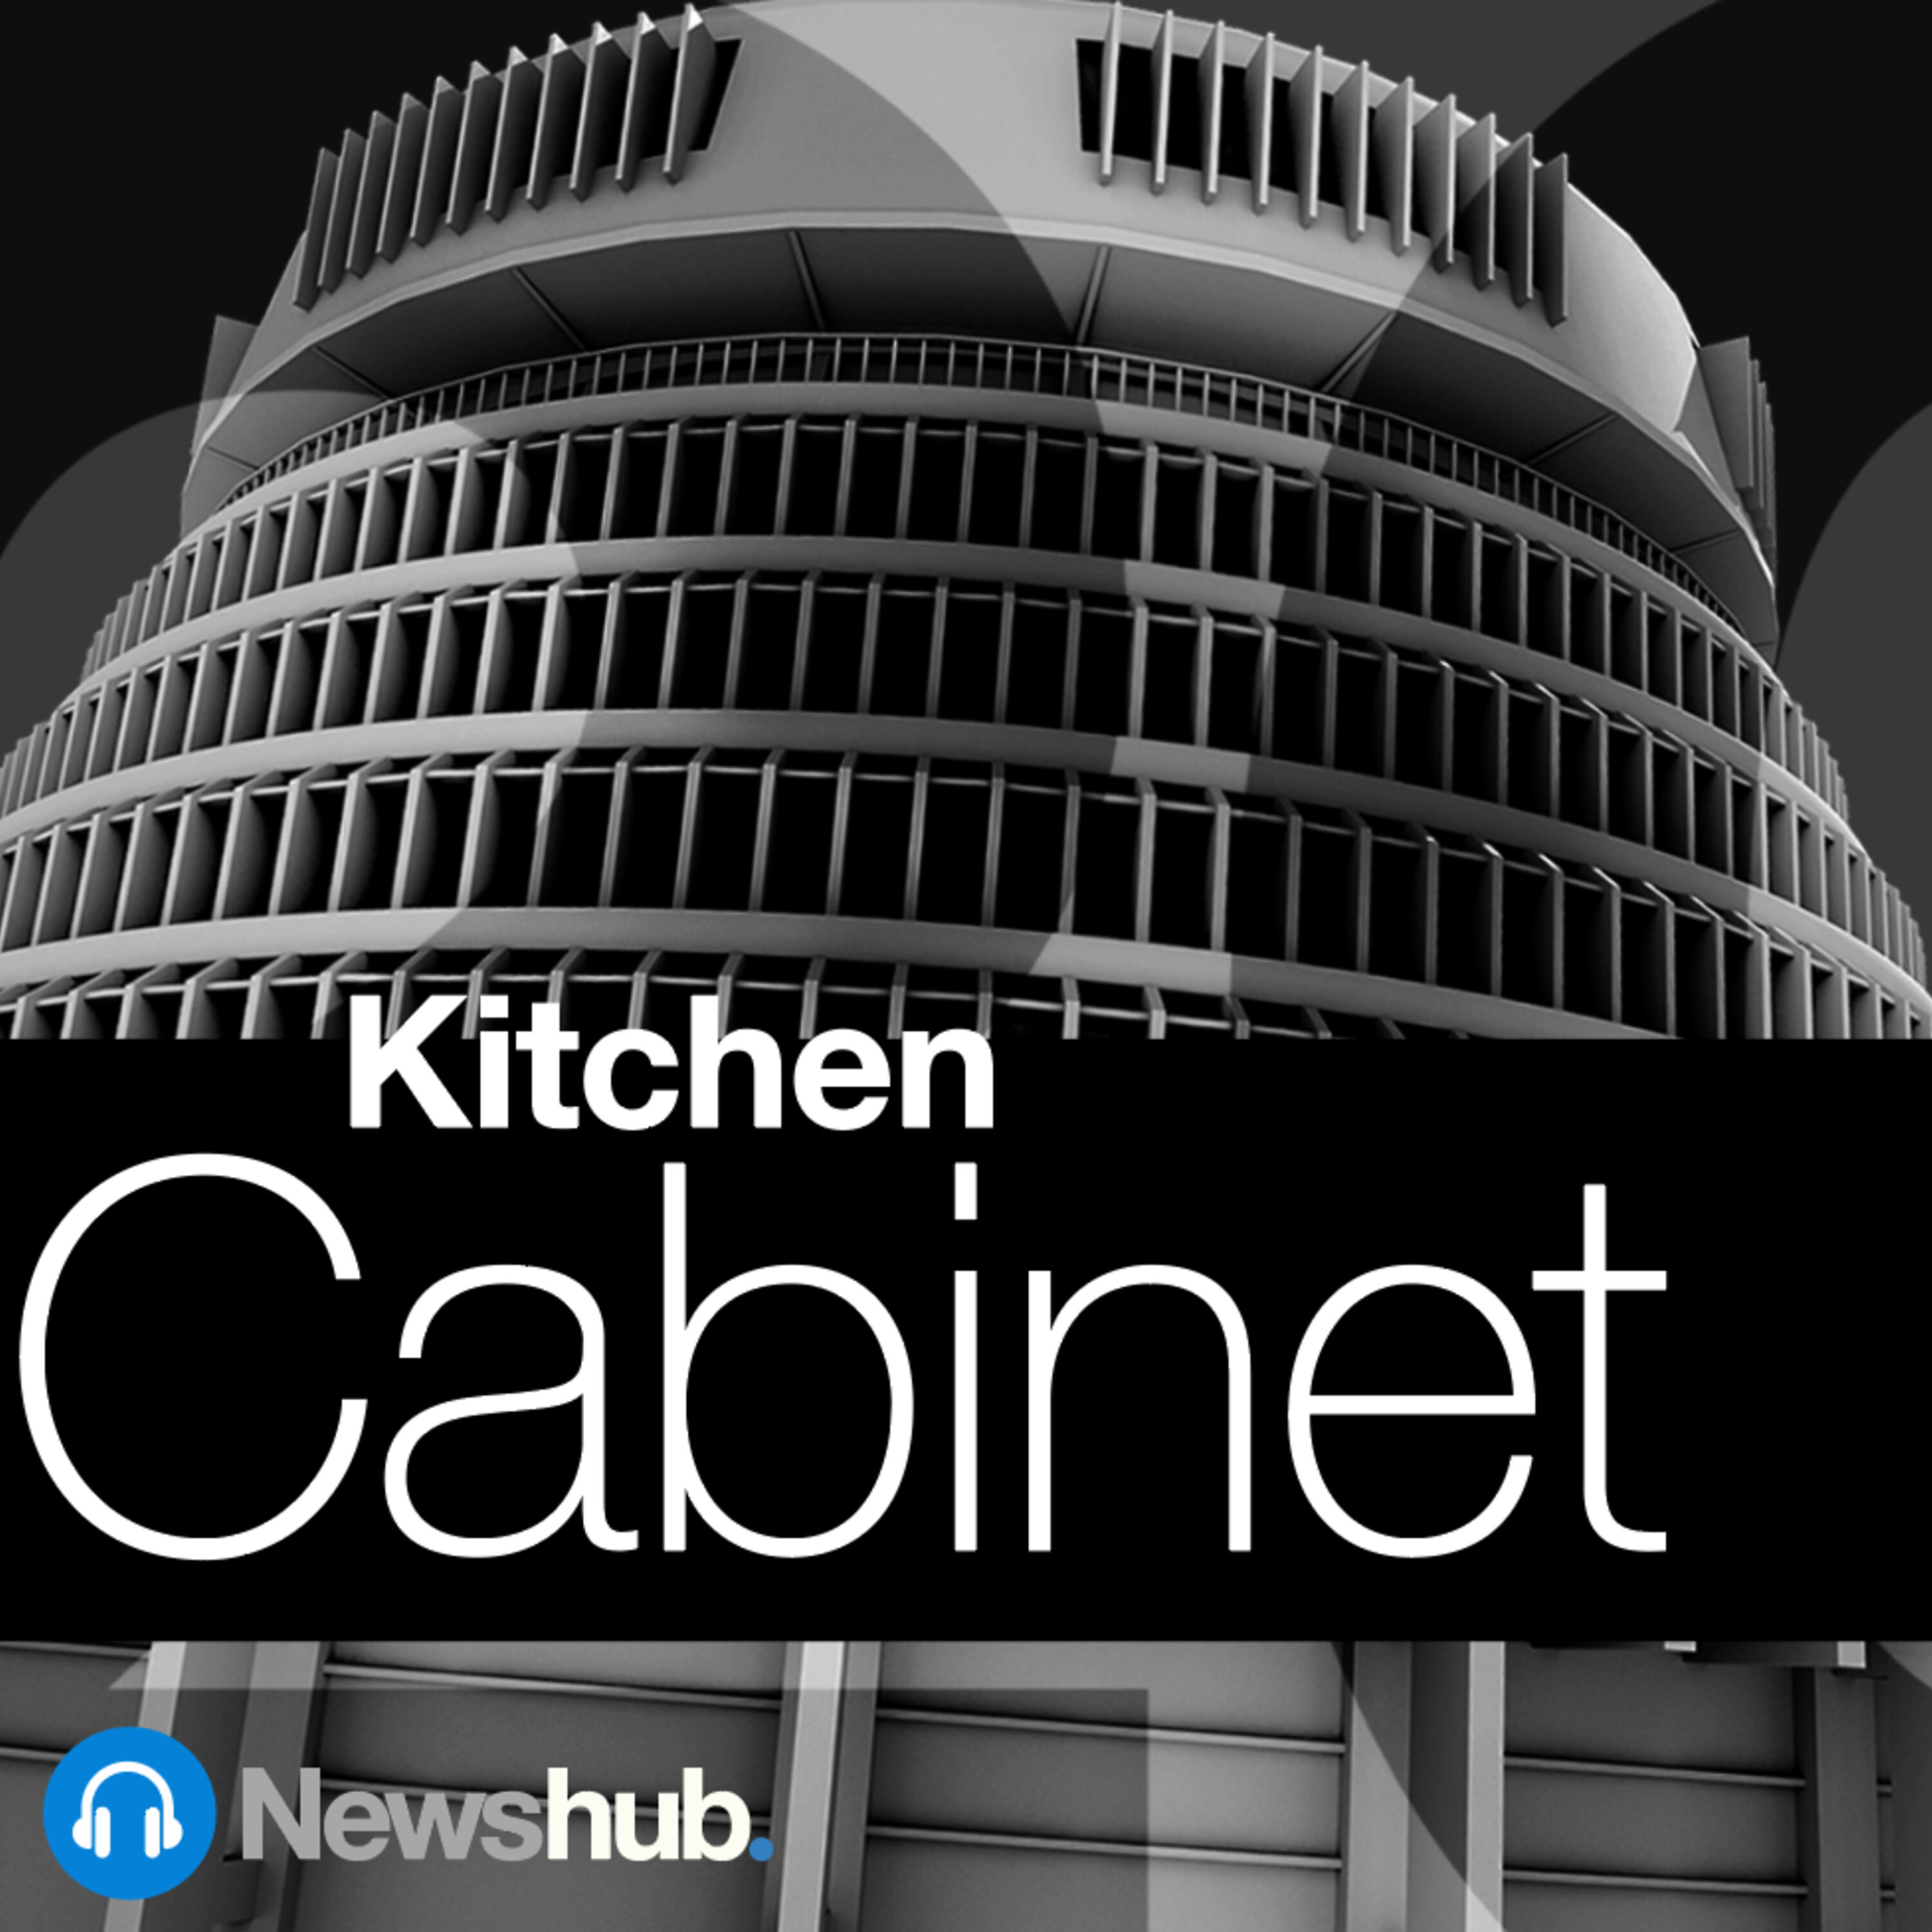 Coming soon: Newshub's Kitchen Cabinet podcast